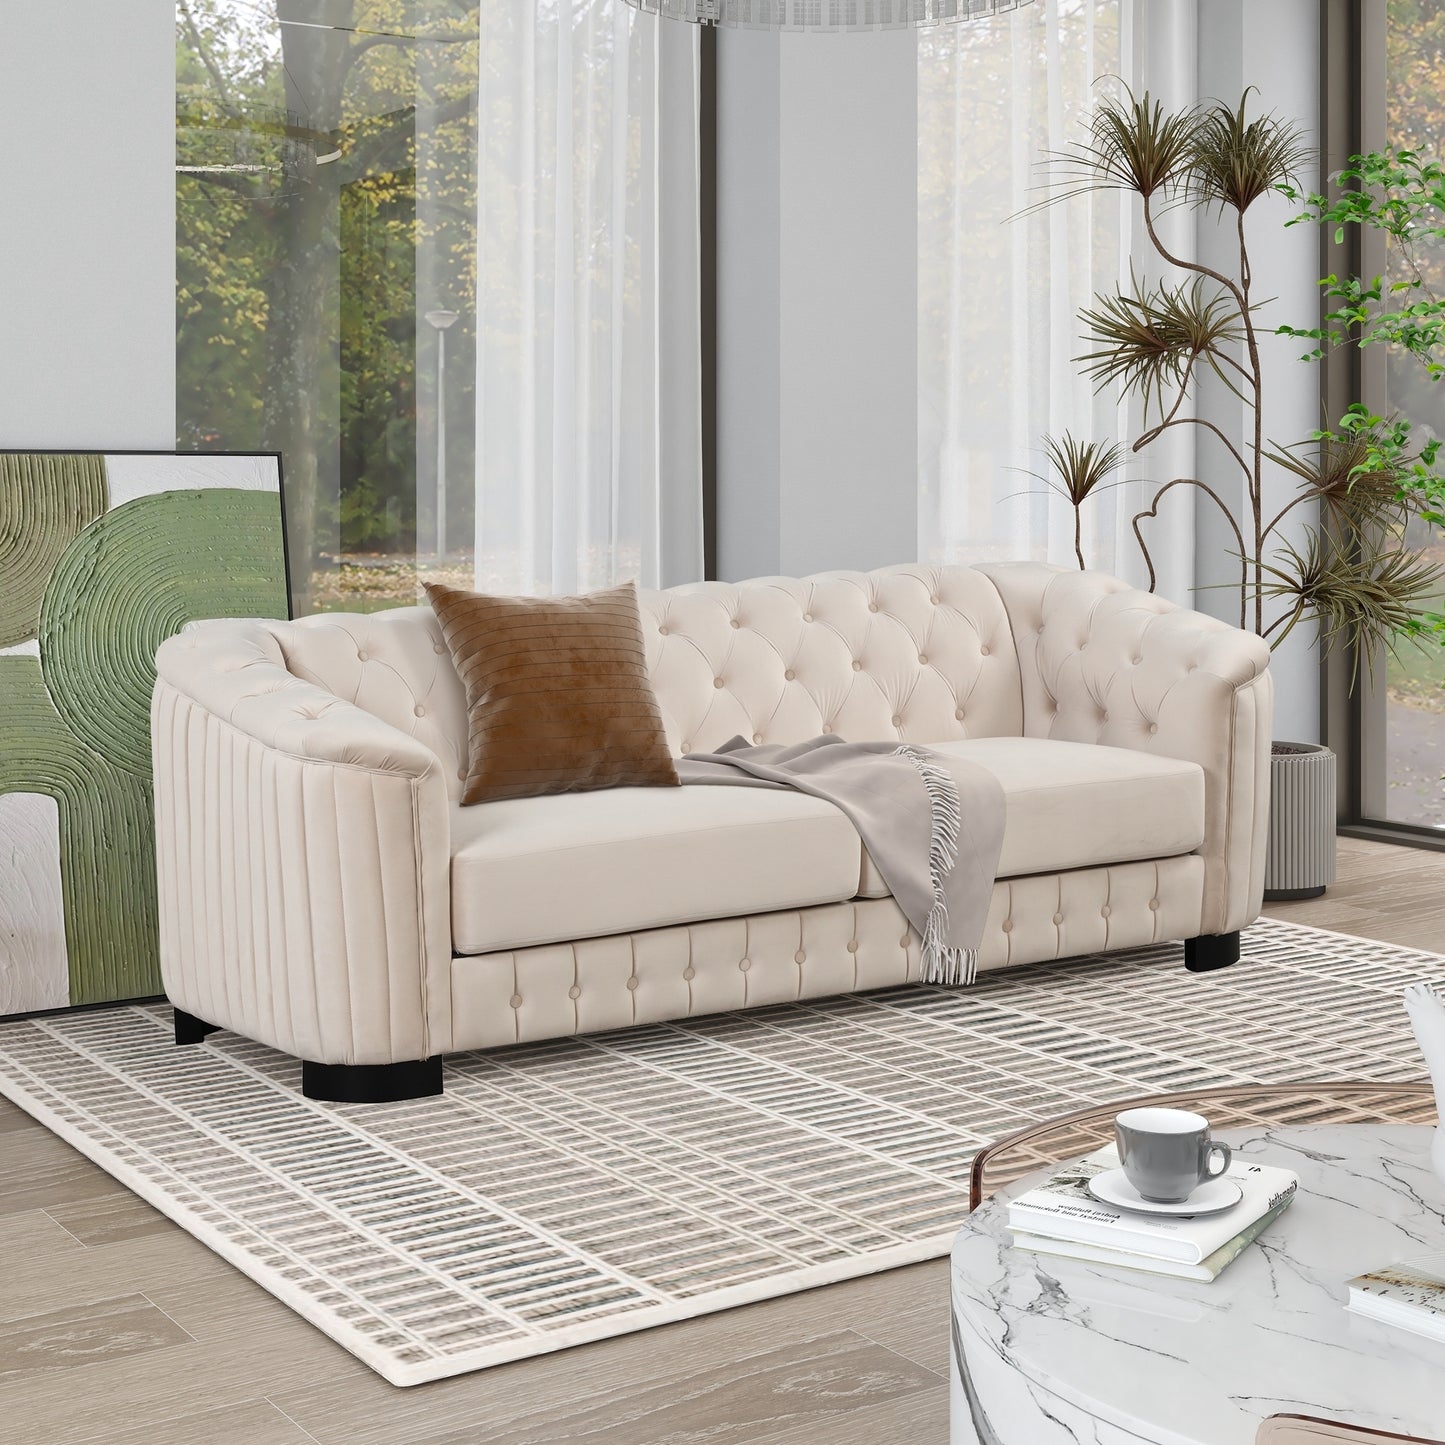 Modern 3-Piece Sofa Sets with Rubber Wood Legs,Velvet Upholstered Couches Sets Including Three Seat Sofa, Loveseat and Single Chair for Living Room Furniture Set,Beige - Enova Luxe Home Store